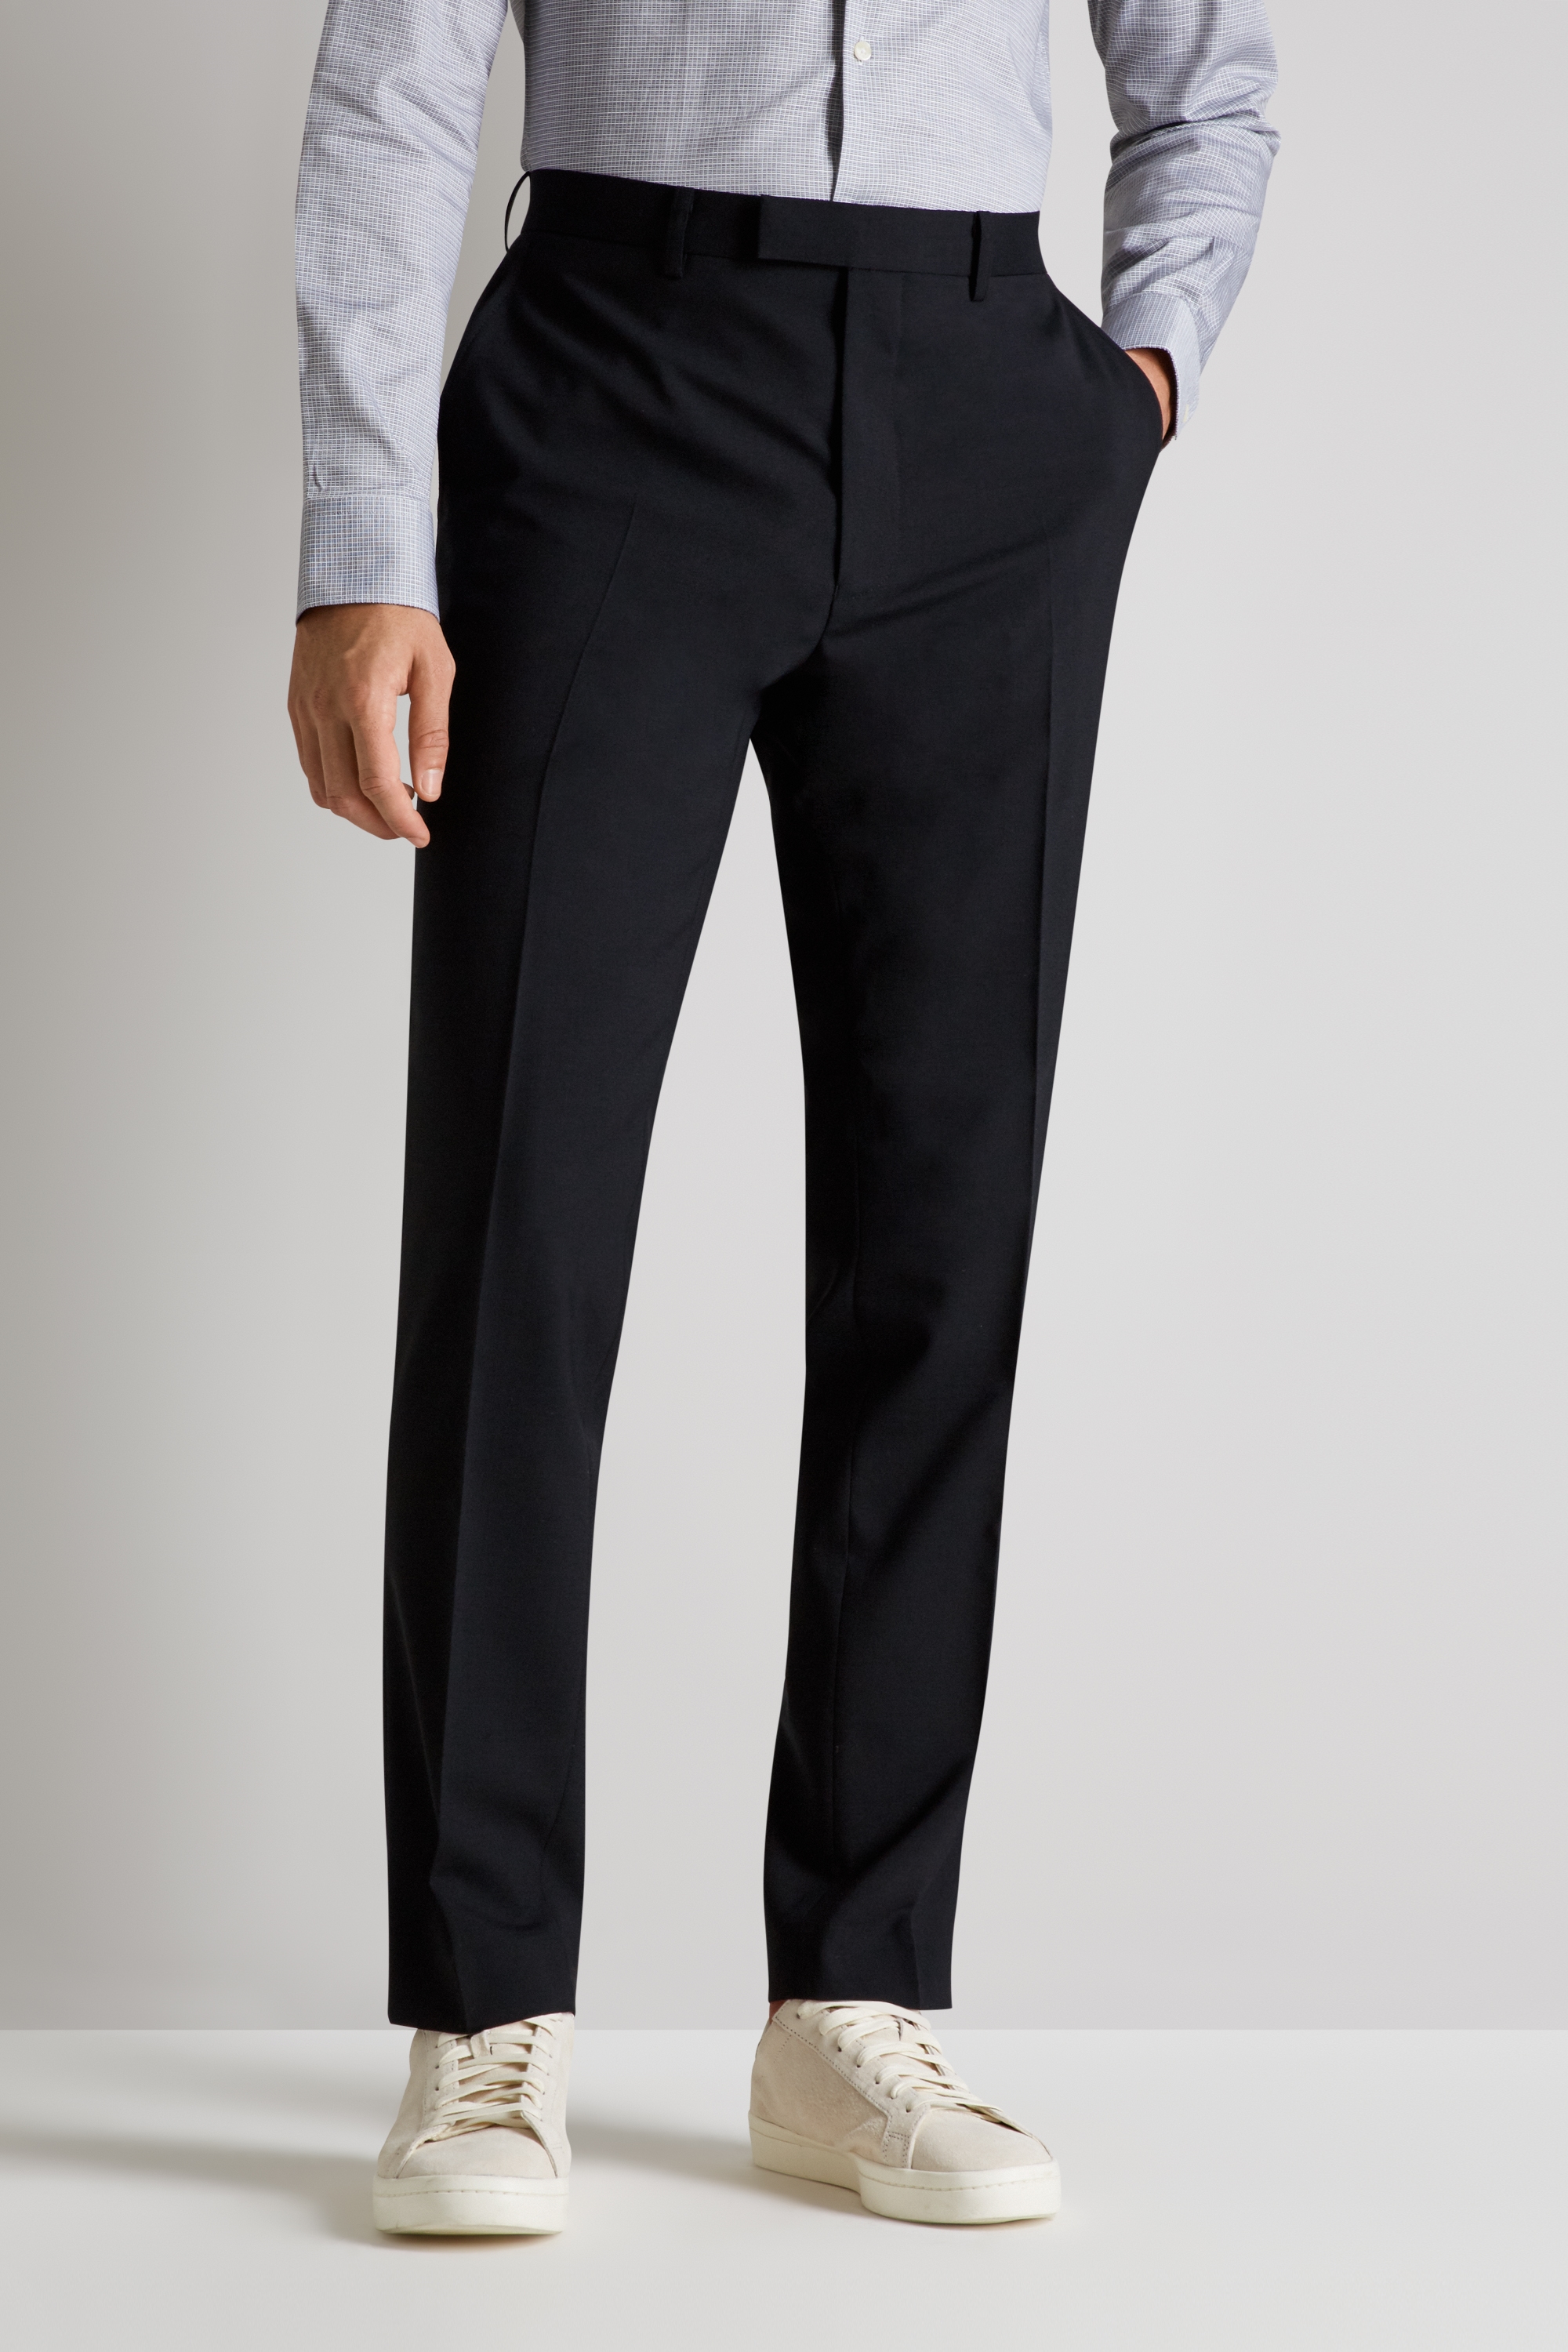 French Connection Slim Fit Black Pants